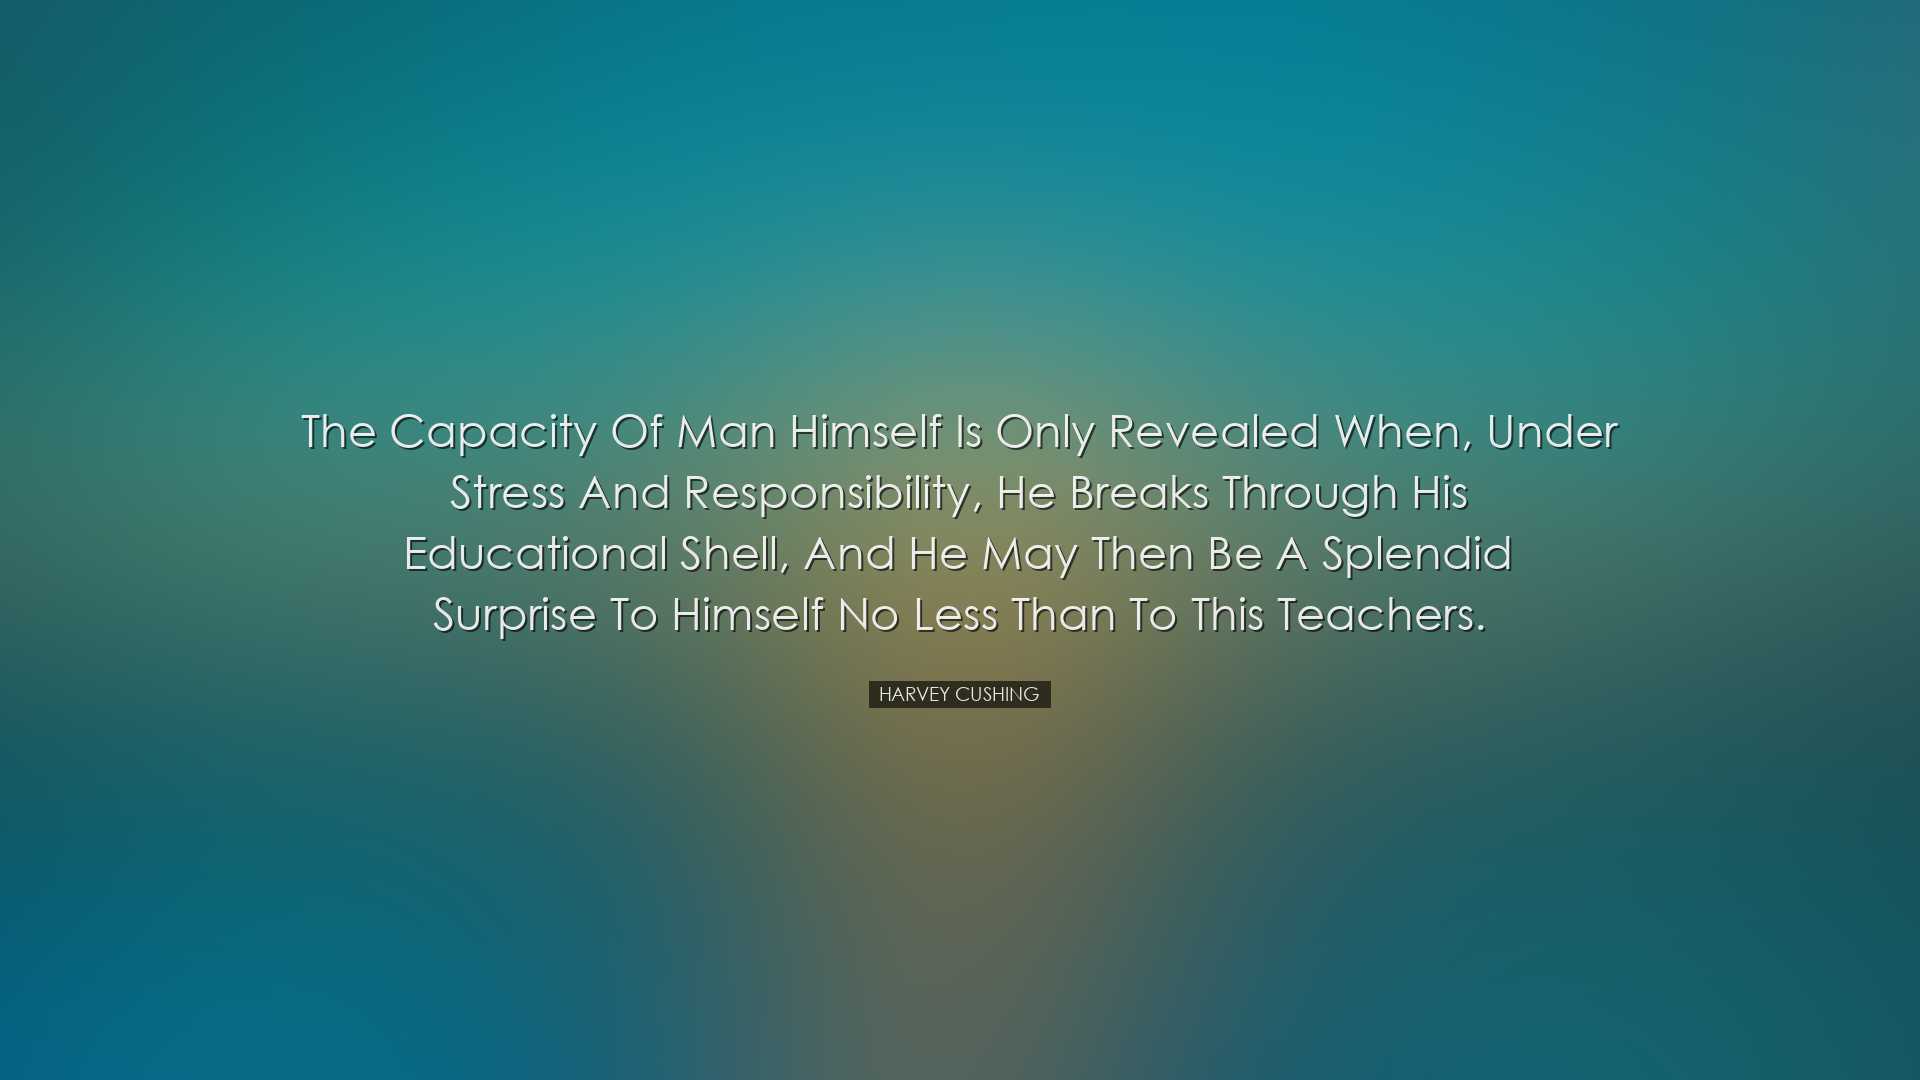 The capacity of man himself is only revealed when, under stress an